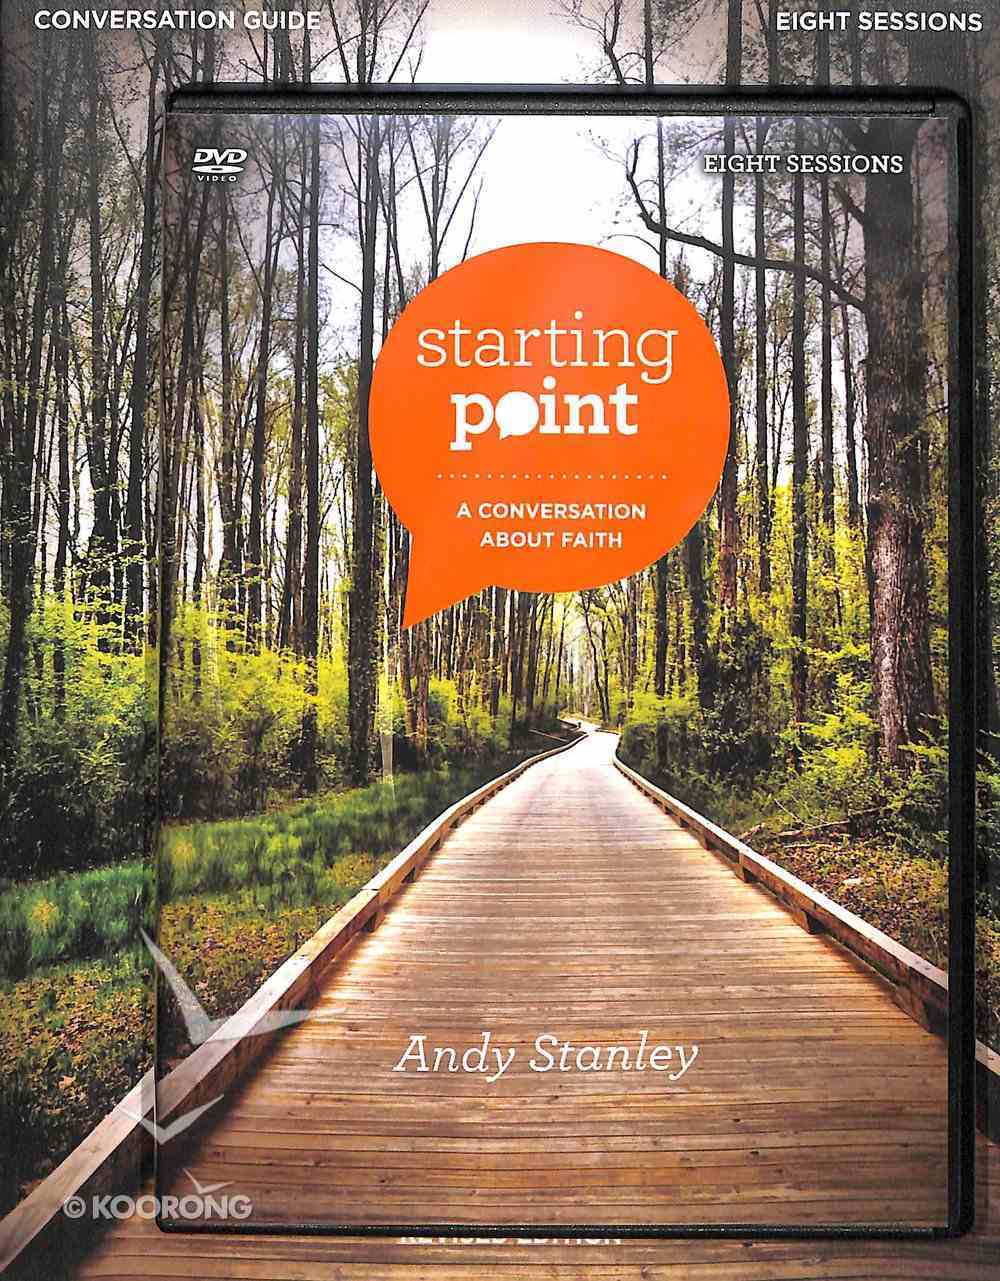 Starting Point (Conversation Guide With Dvd) Pack